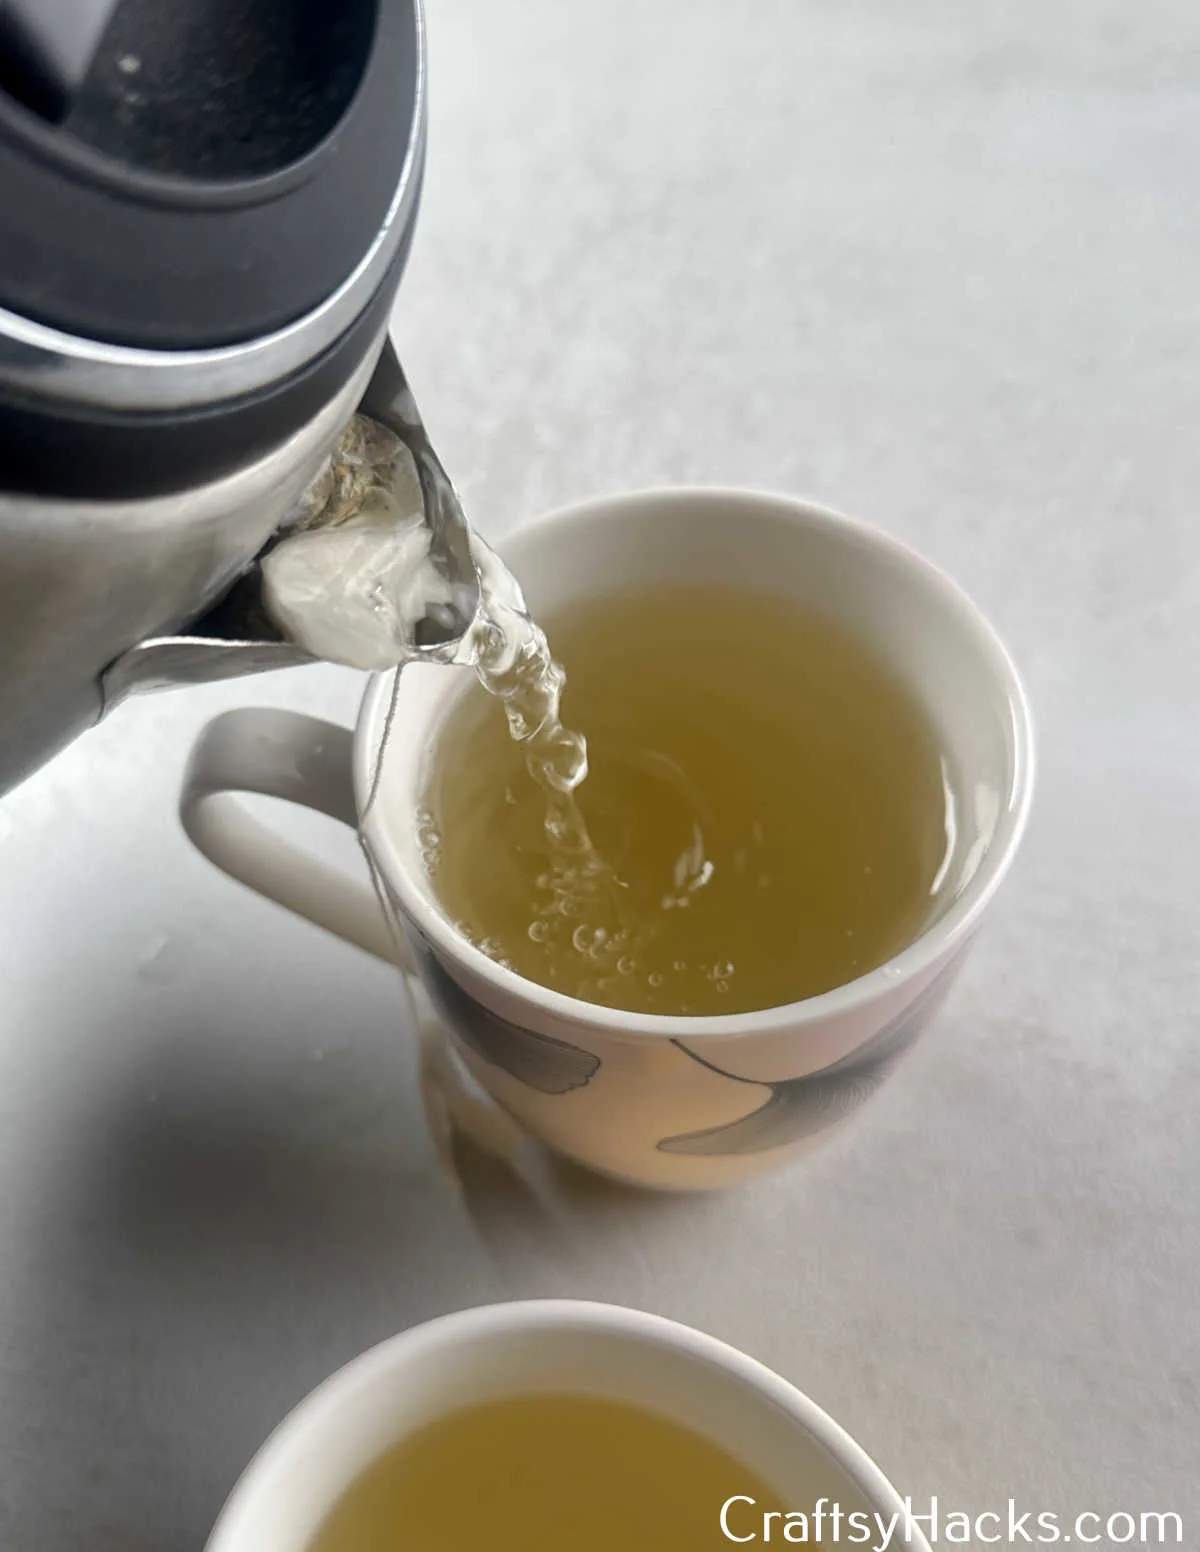 insert teabag into the kettle mouth cap to serve more cups of tea